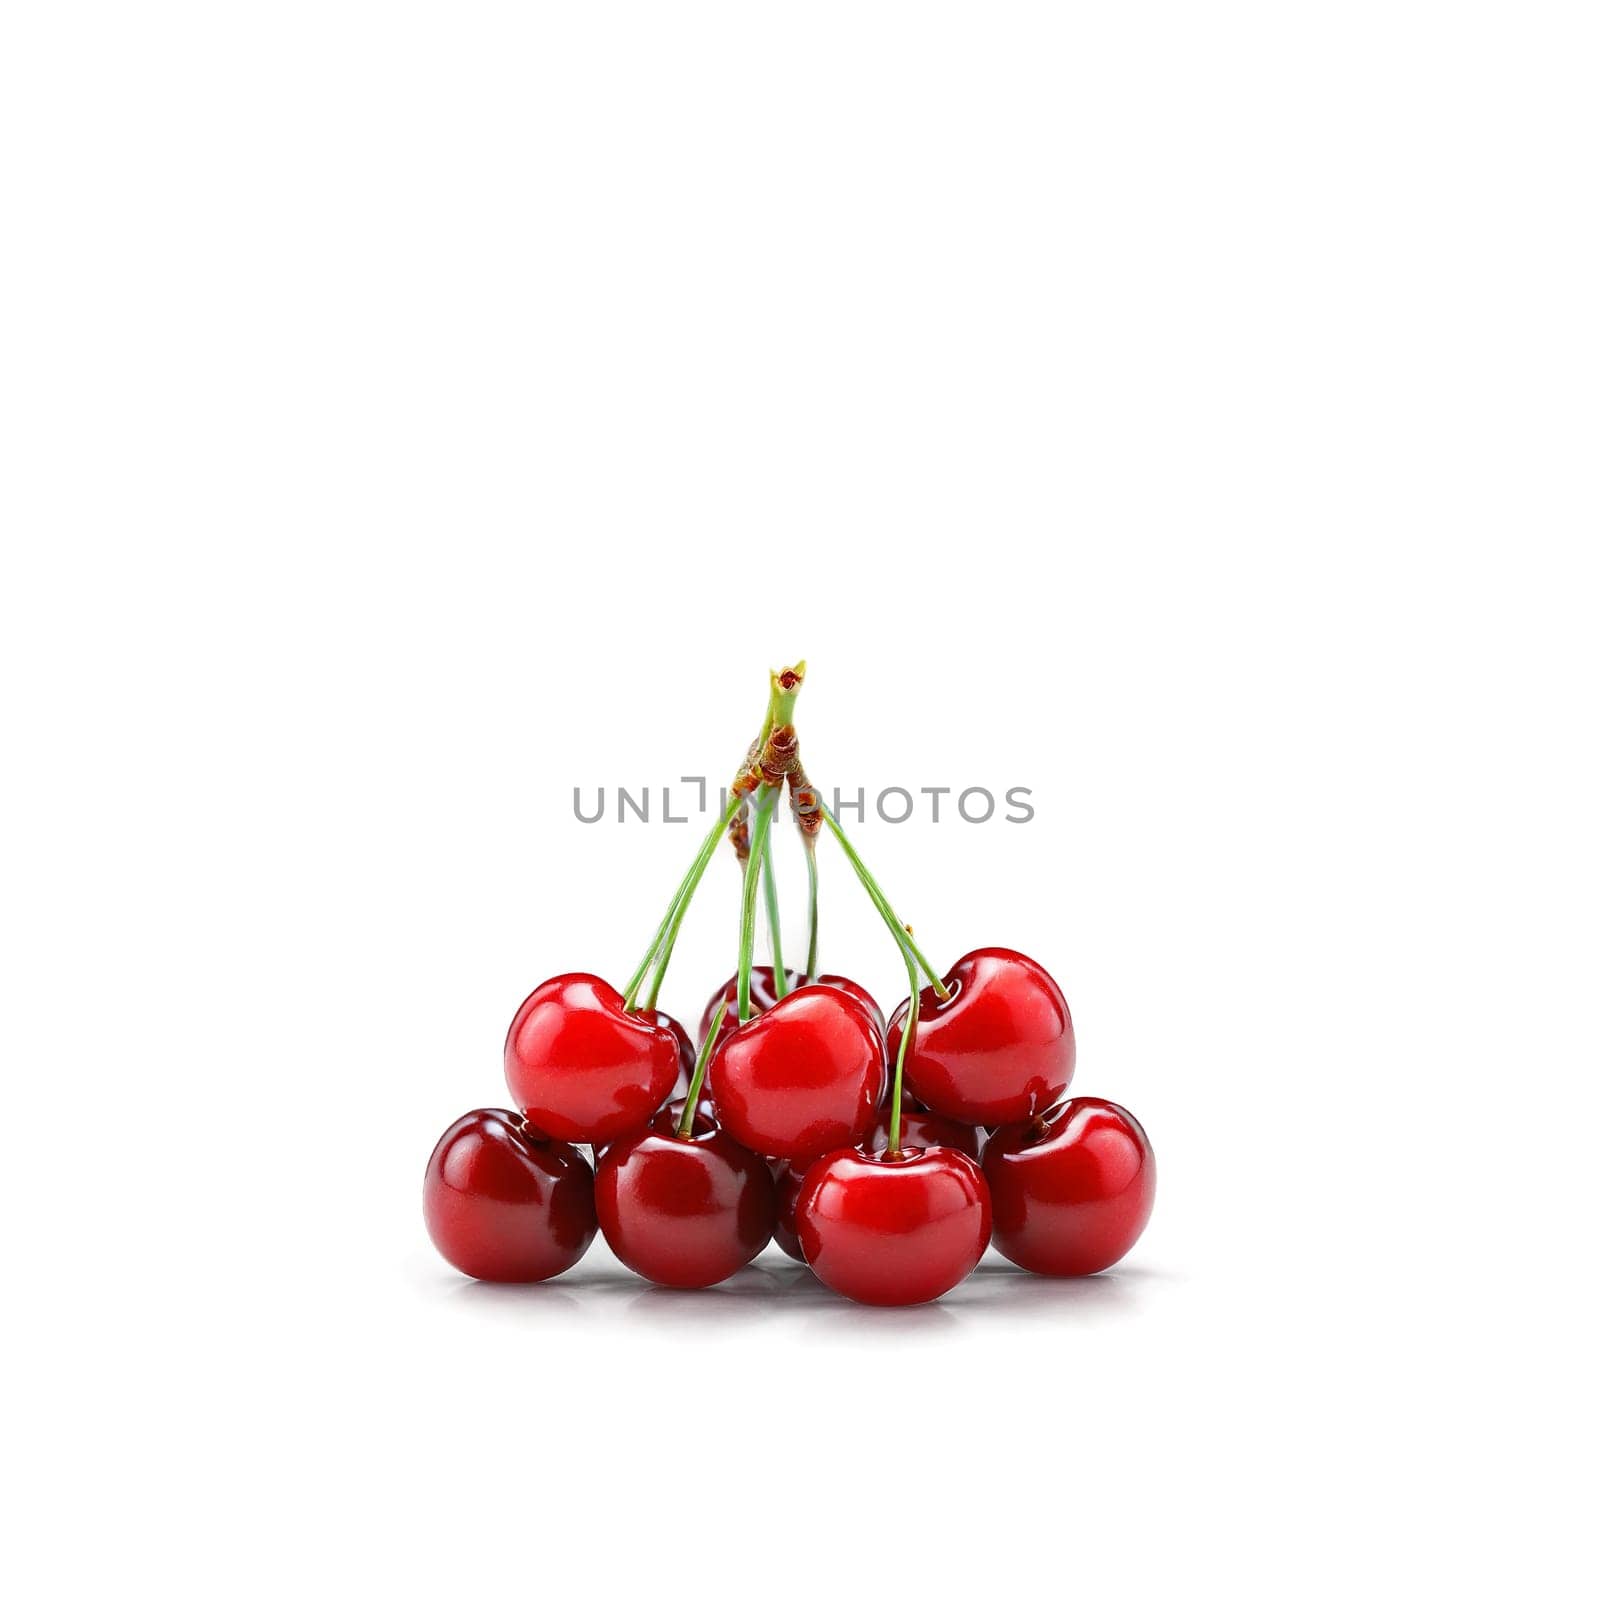 Acerola with bright red cherries and green stems in scattered bunch Food and culinary concept by panophotograph